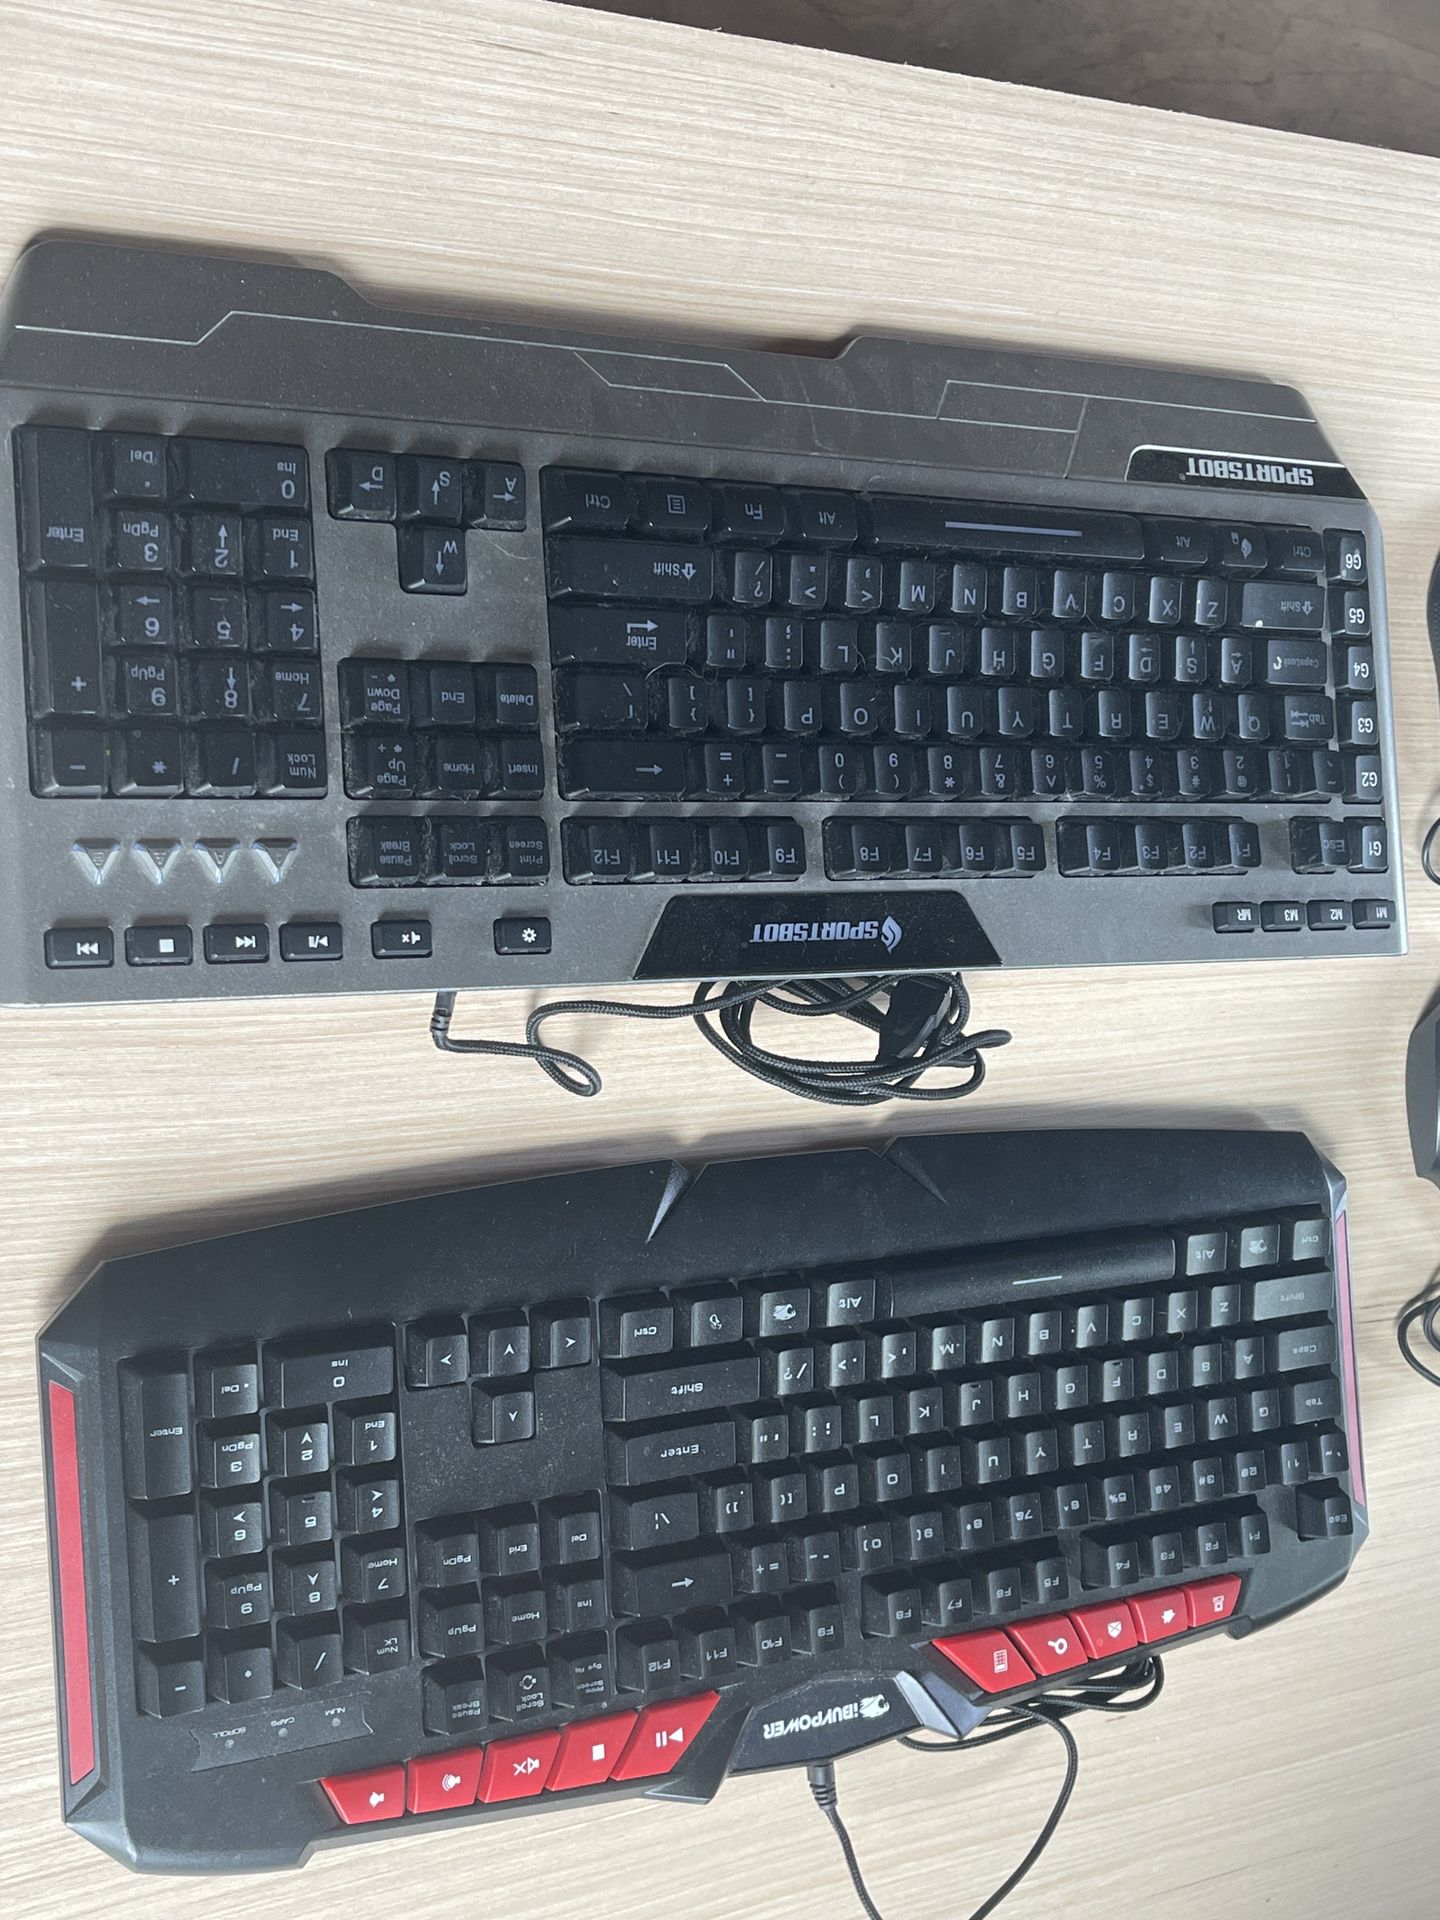 2 iBUYPOWER GKB100 Gaming Keyboards Spill Resistant Black/Red | 2 Mouses